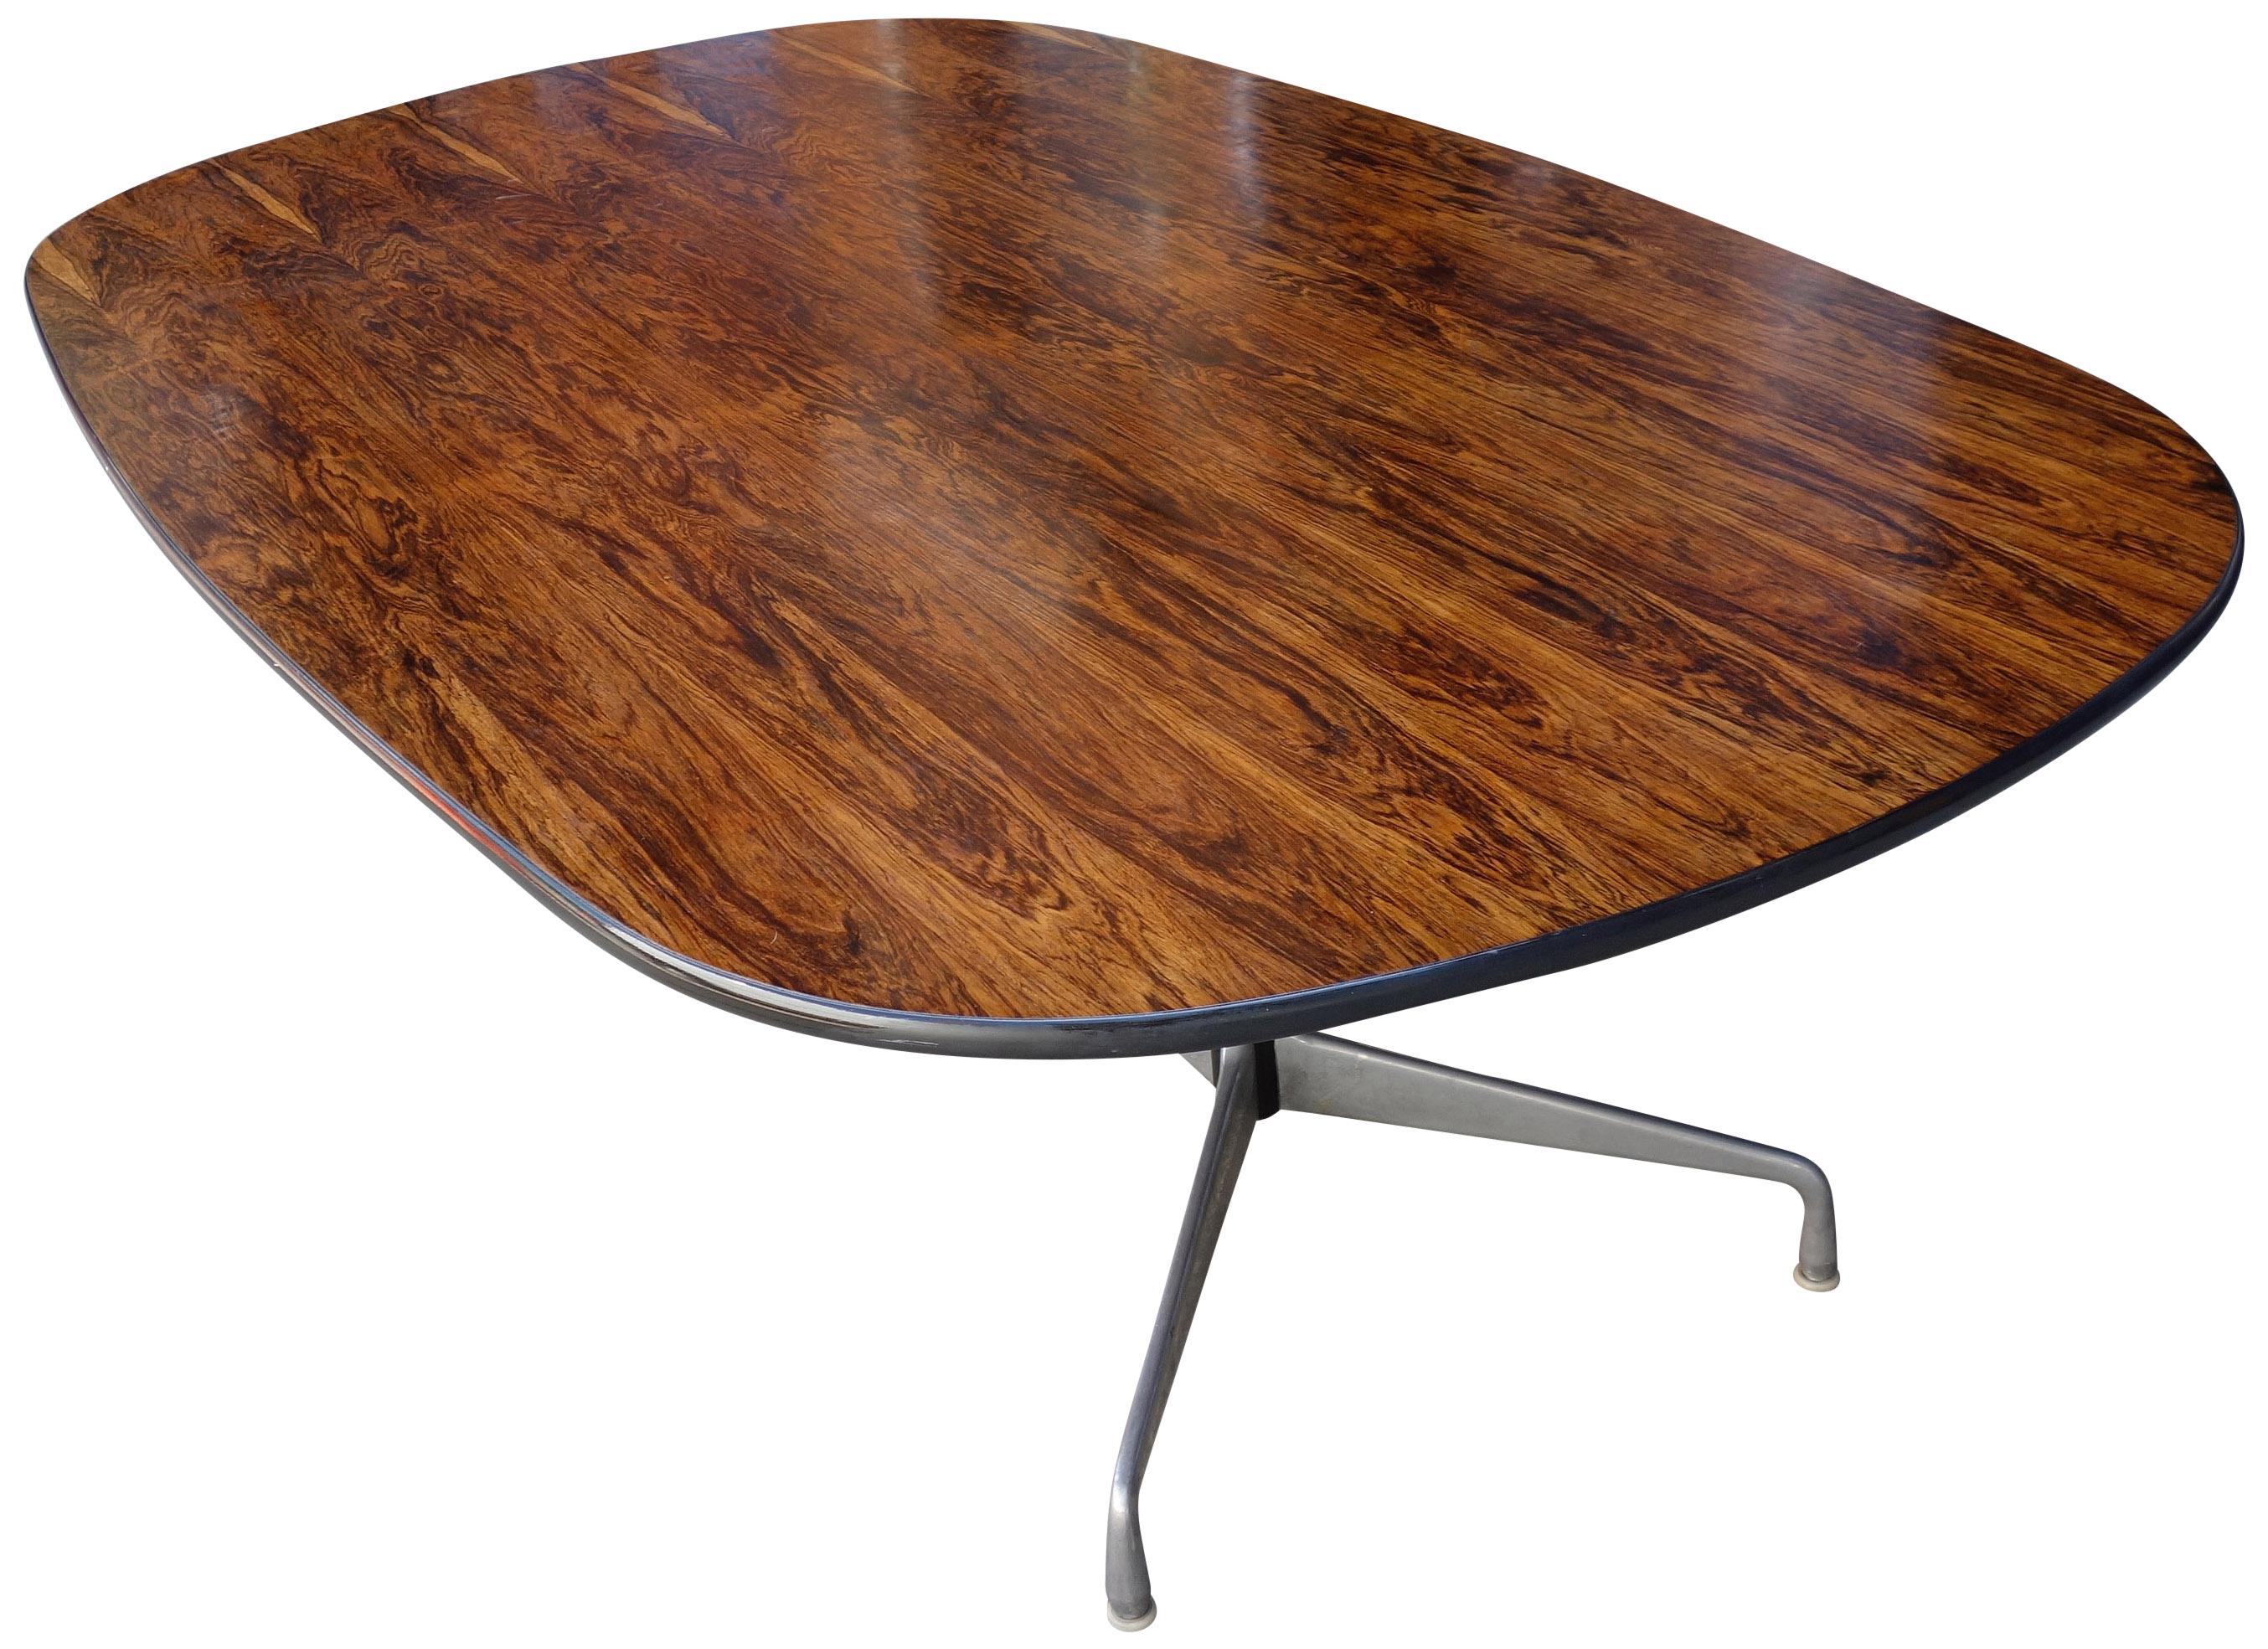 Wood Midcentury Segmented Base Table by Eames for Herman Miller